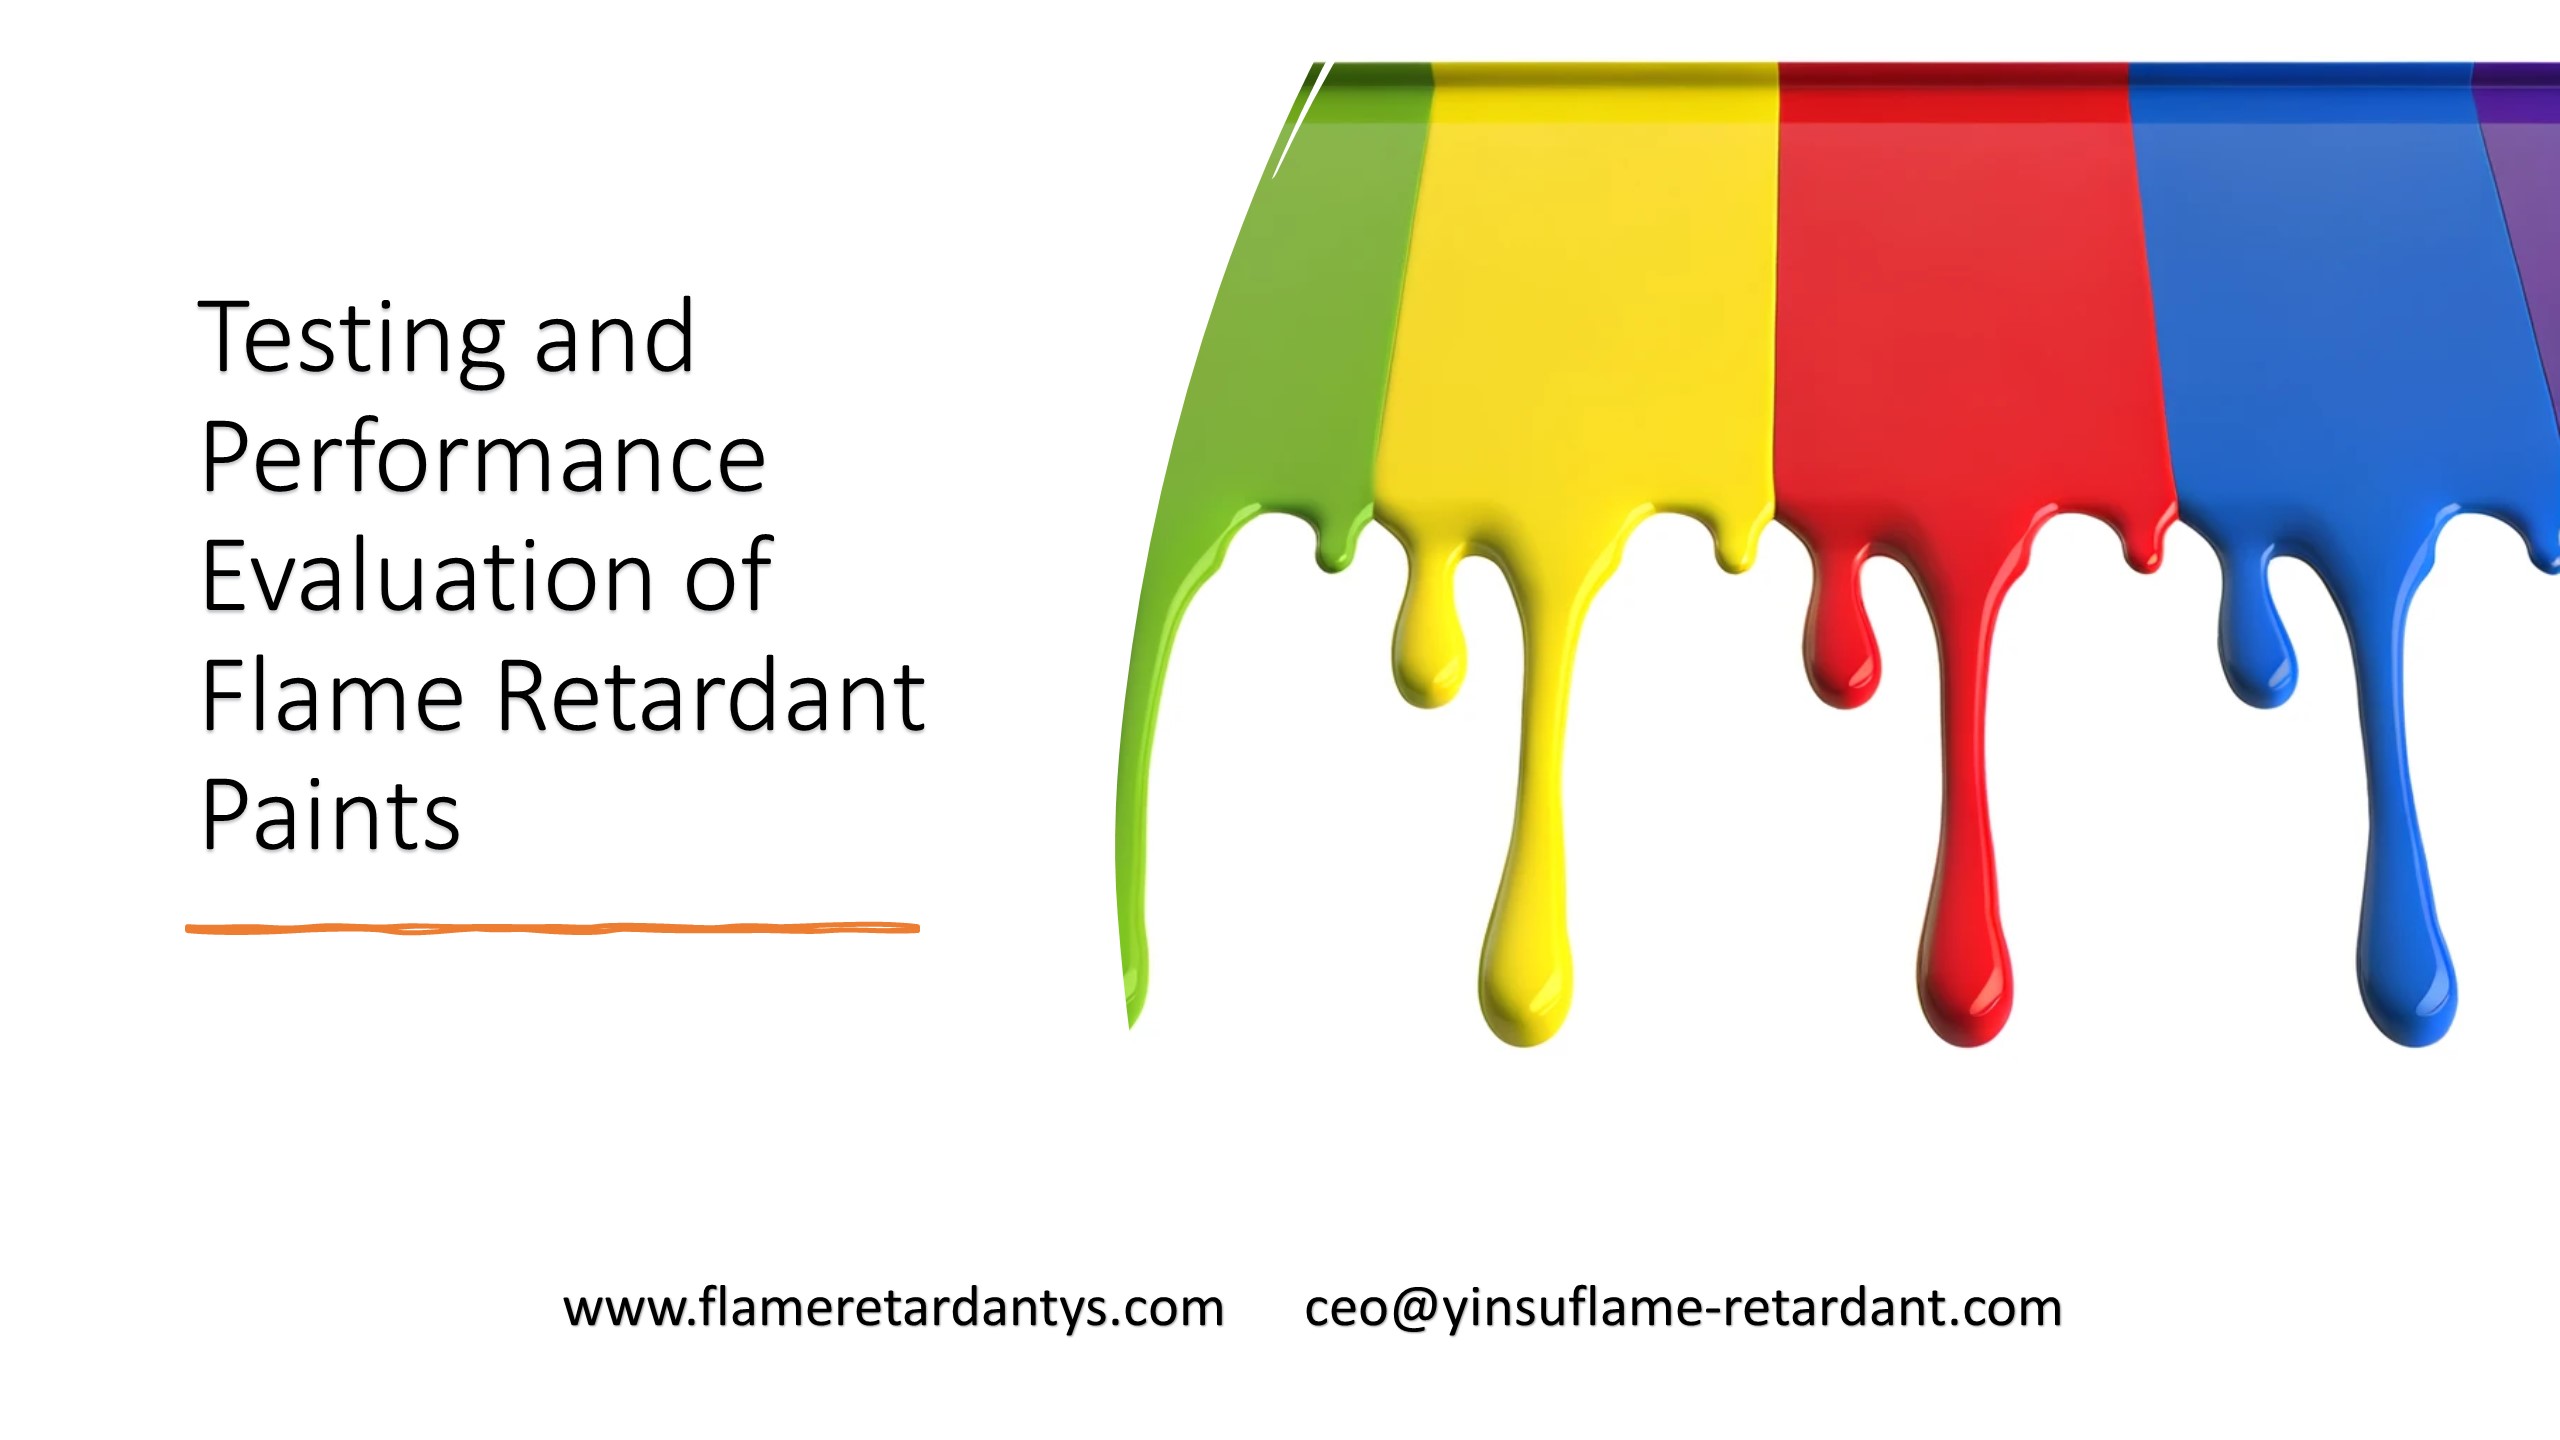 Testing And Performance Evaluation of Flame Retardant Paints